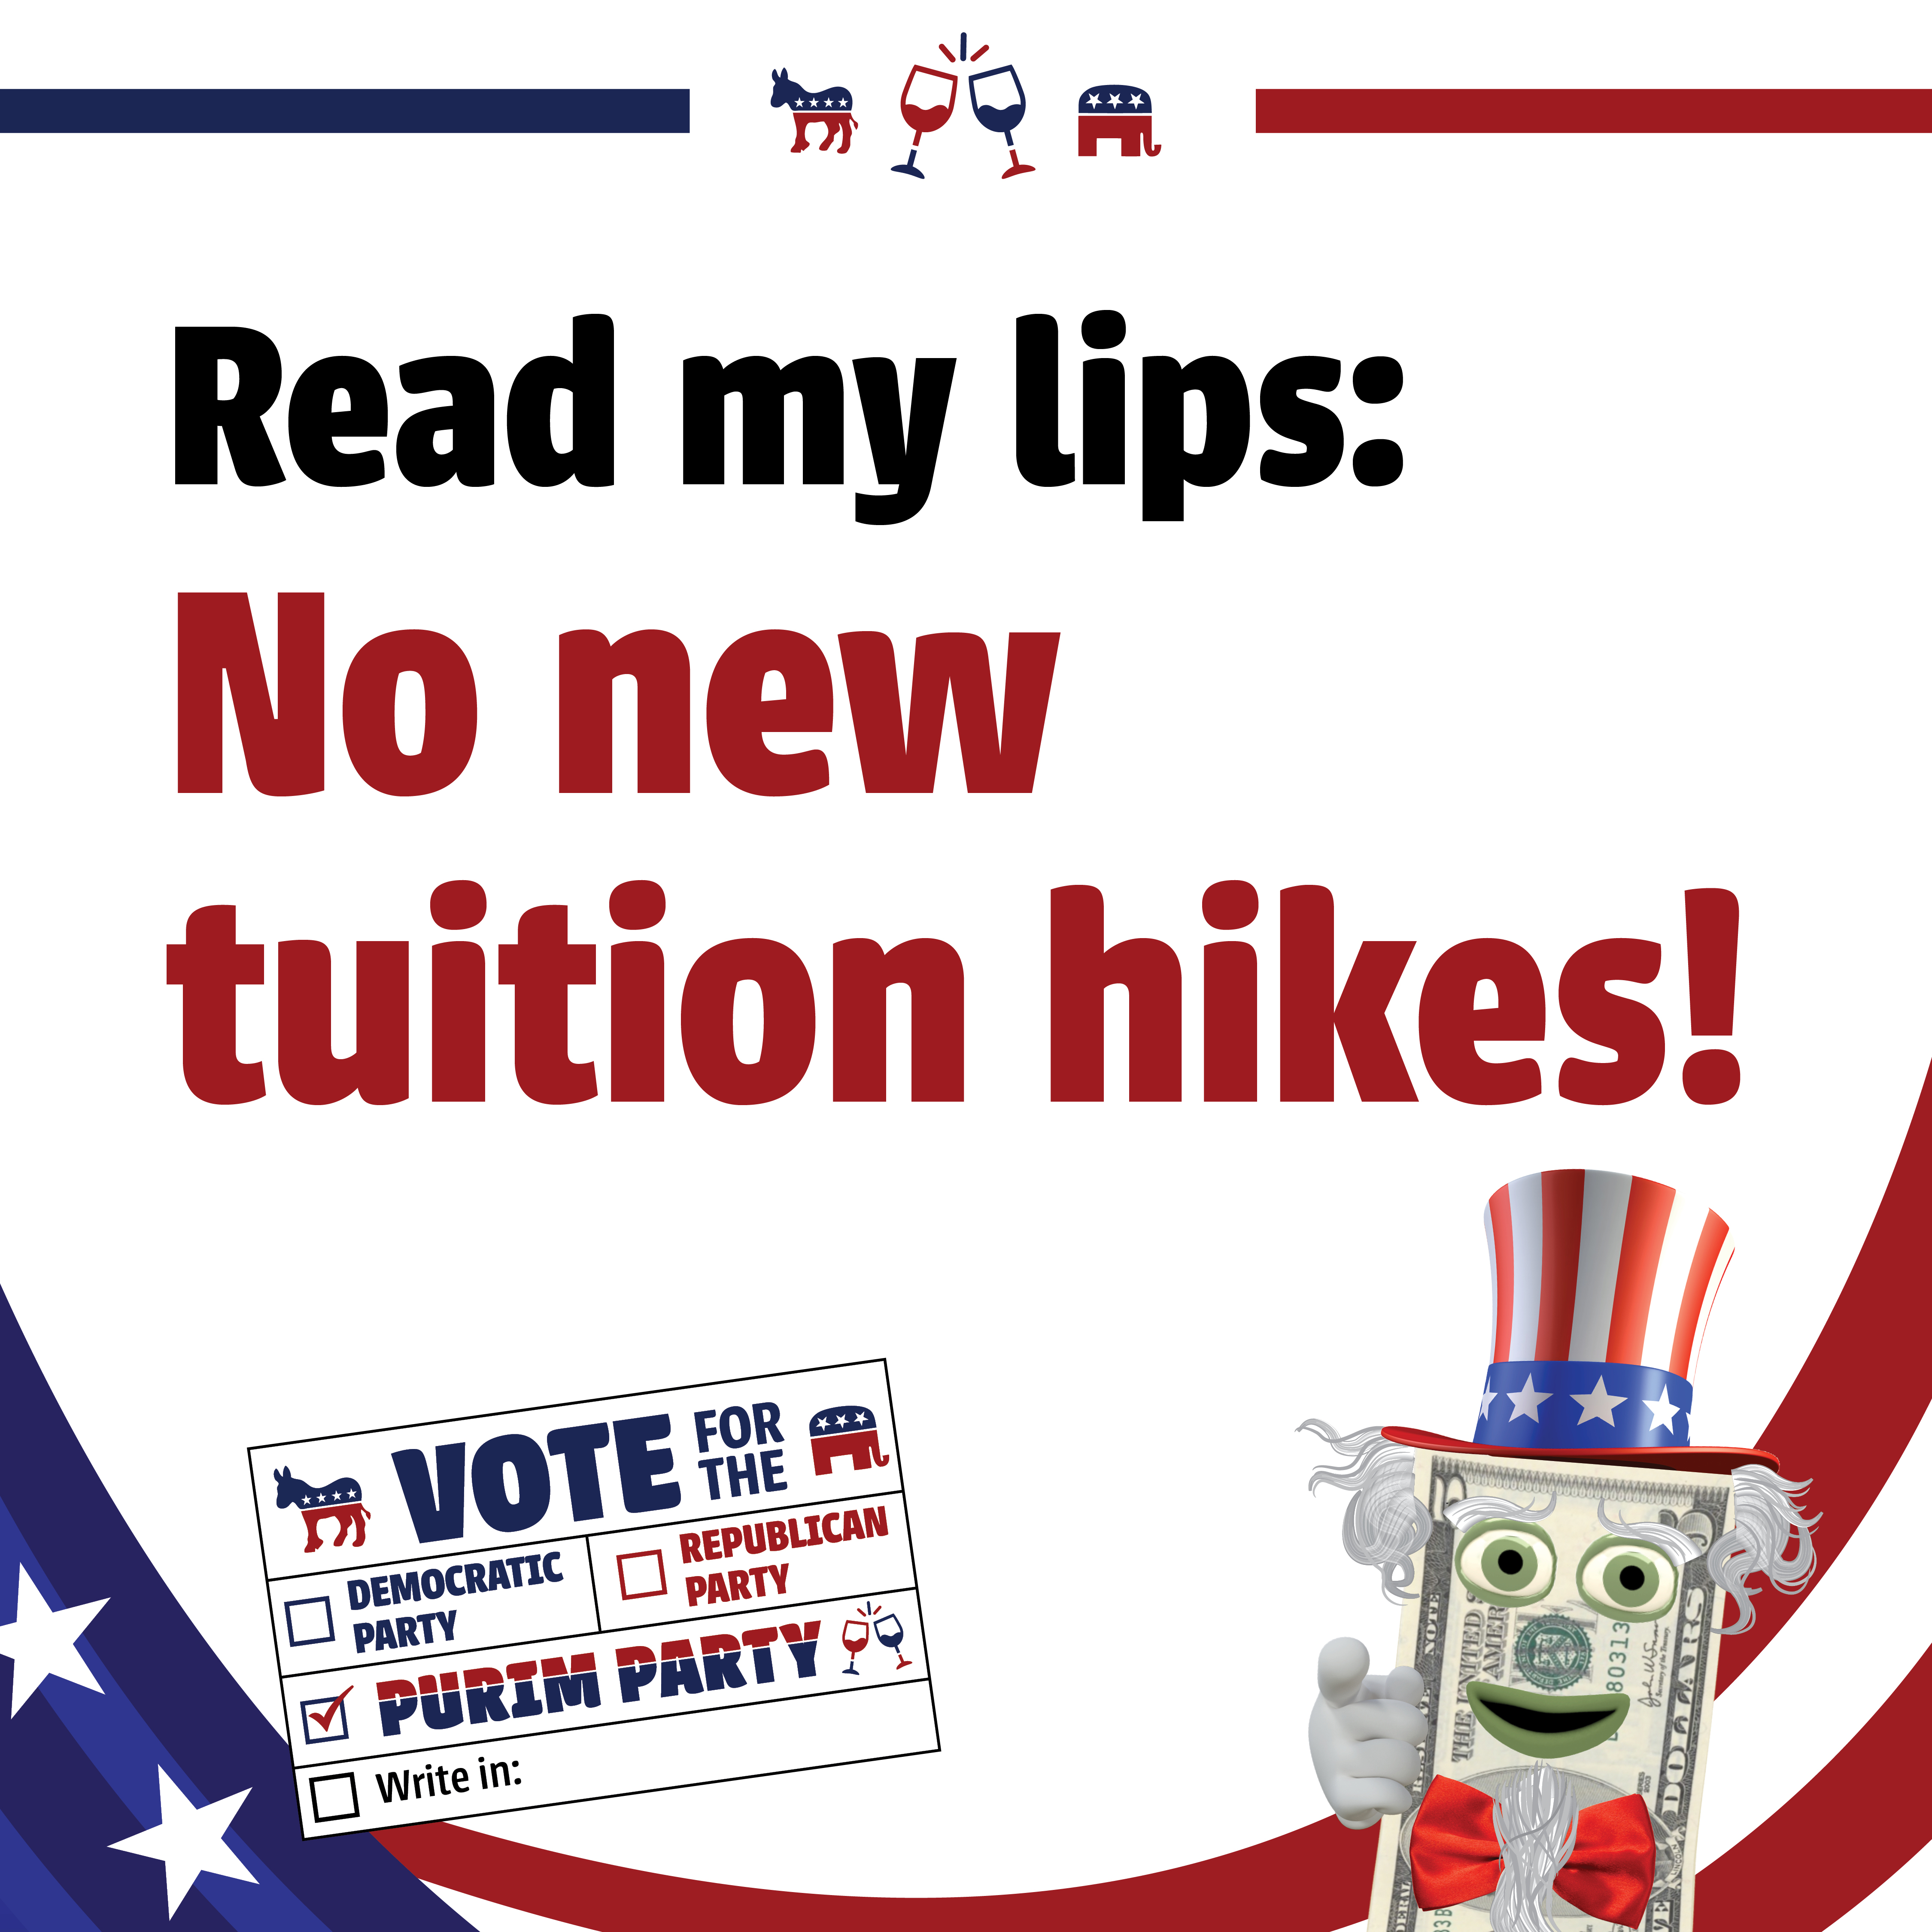 Read my lips: No new tuition hikes!